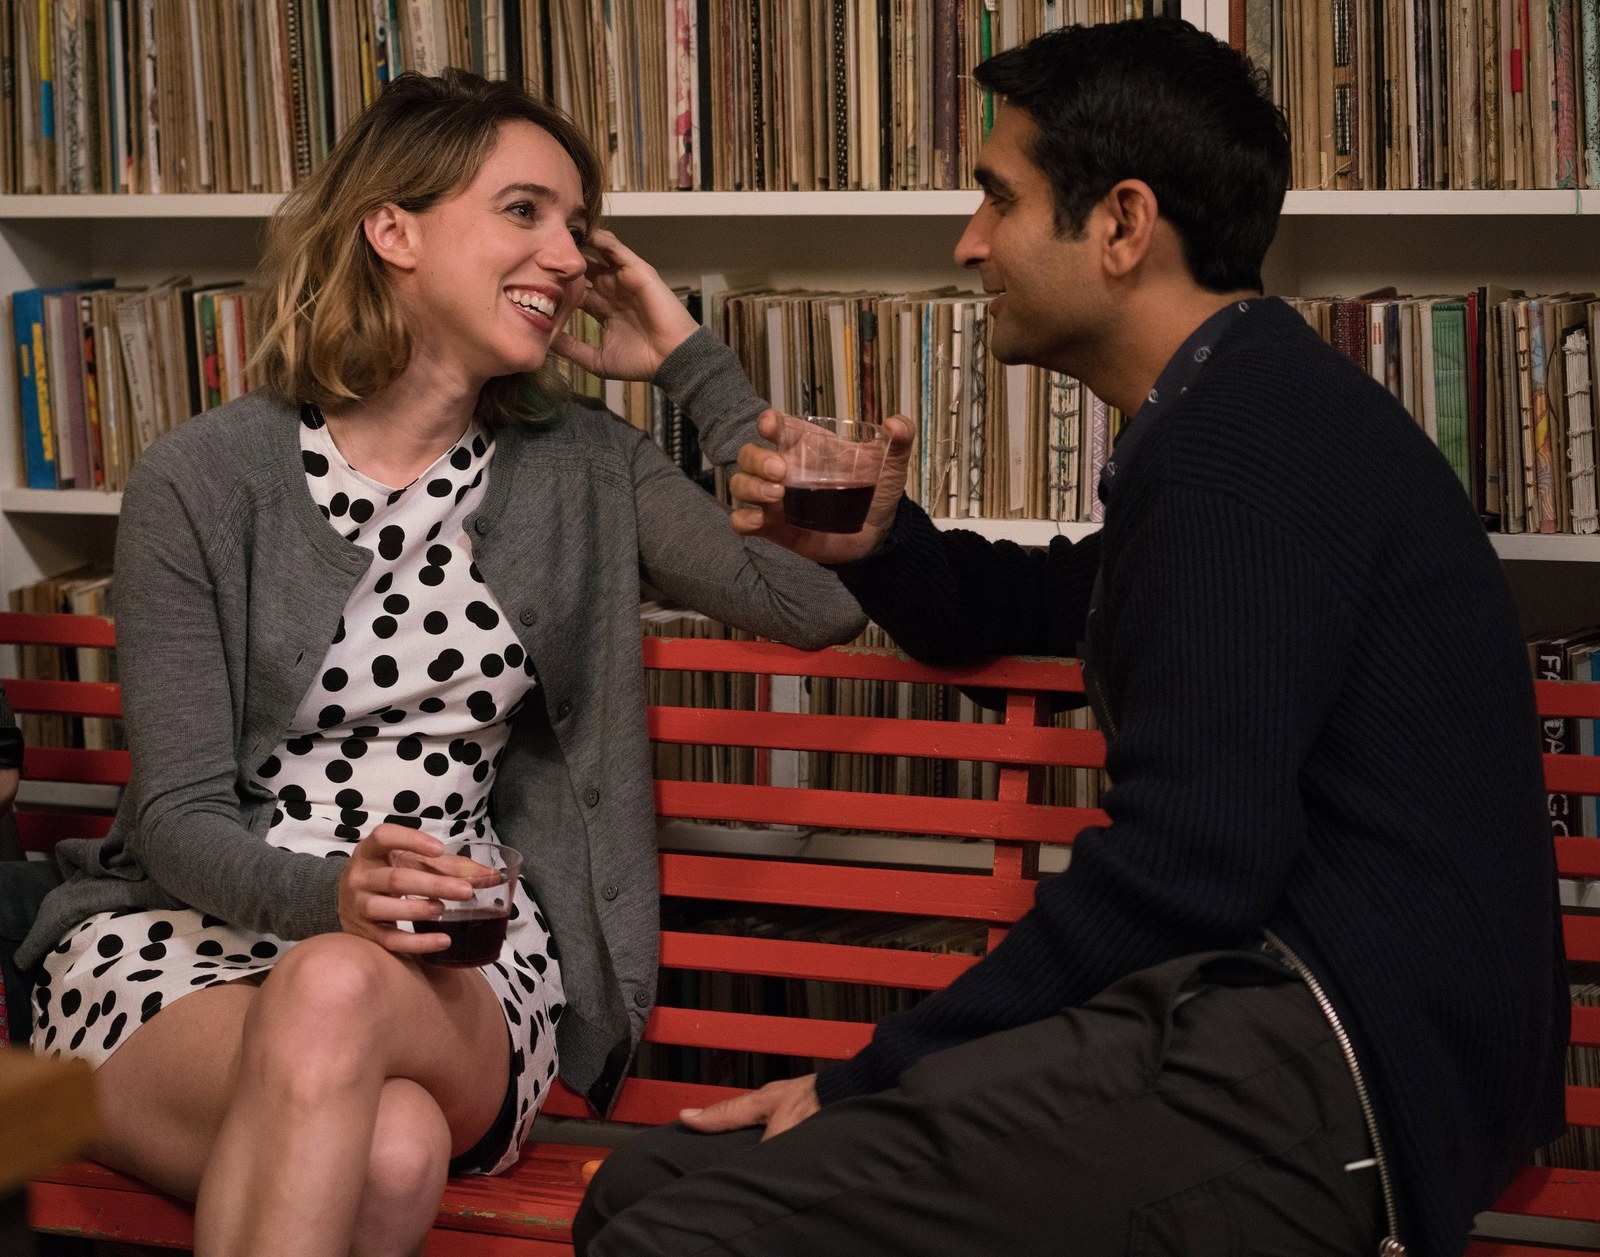 Why Are Brown Men So Infatuated With White Women Onscreen?